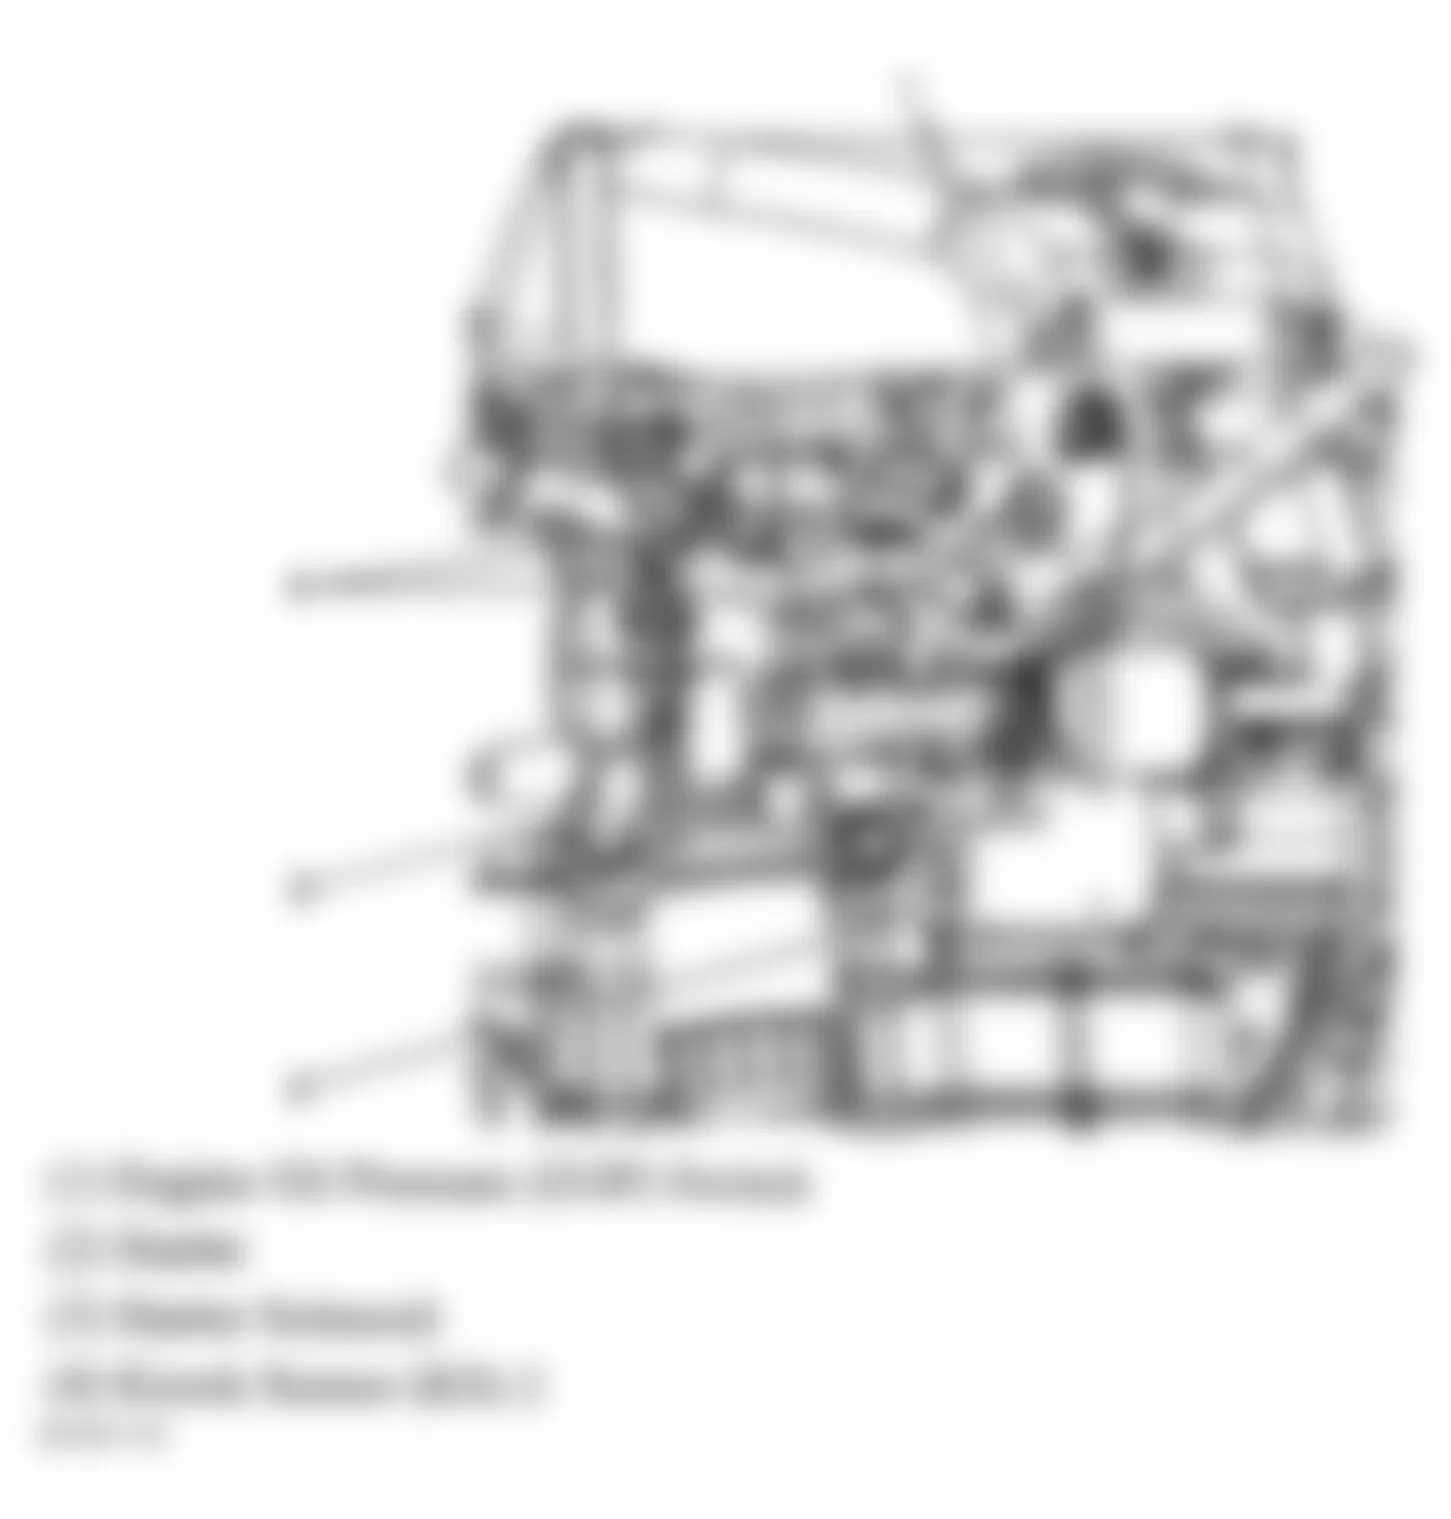 Chevrolet Malibu SS 2006 - Component Locations -  Lower Left Side Of Engine (3.5L)